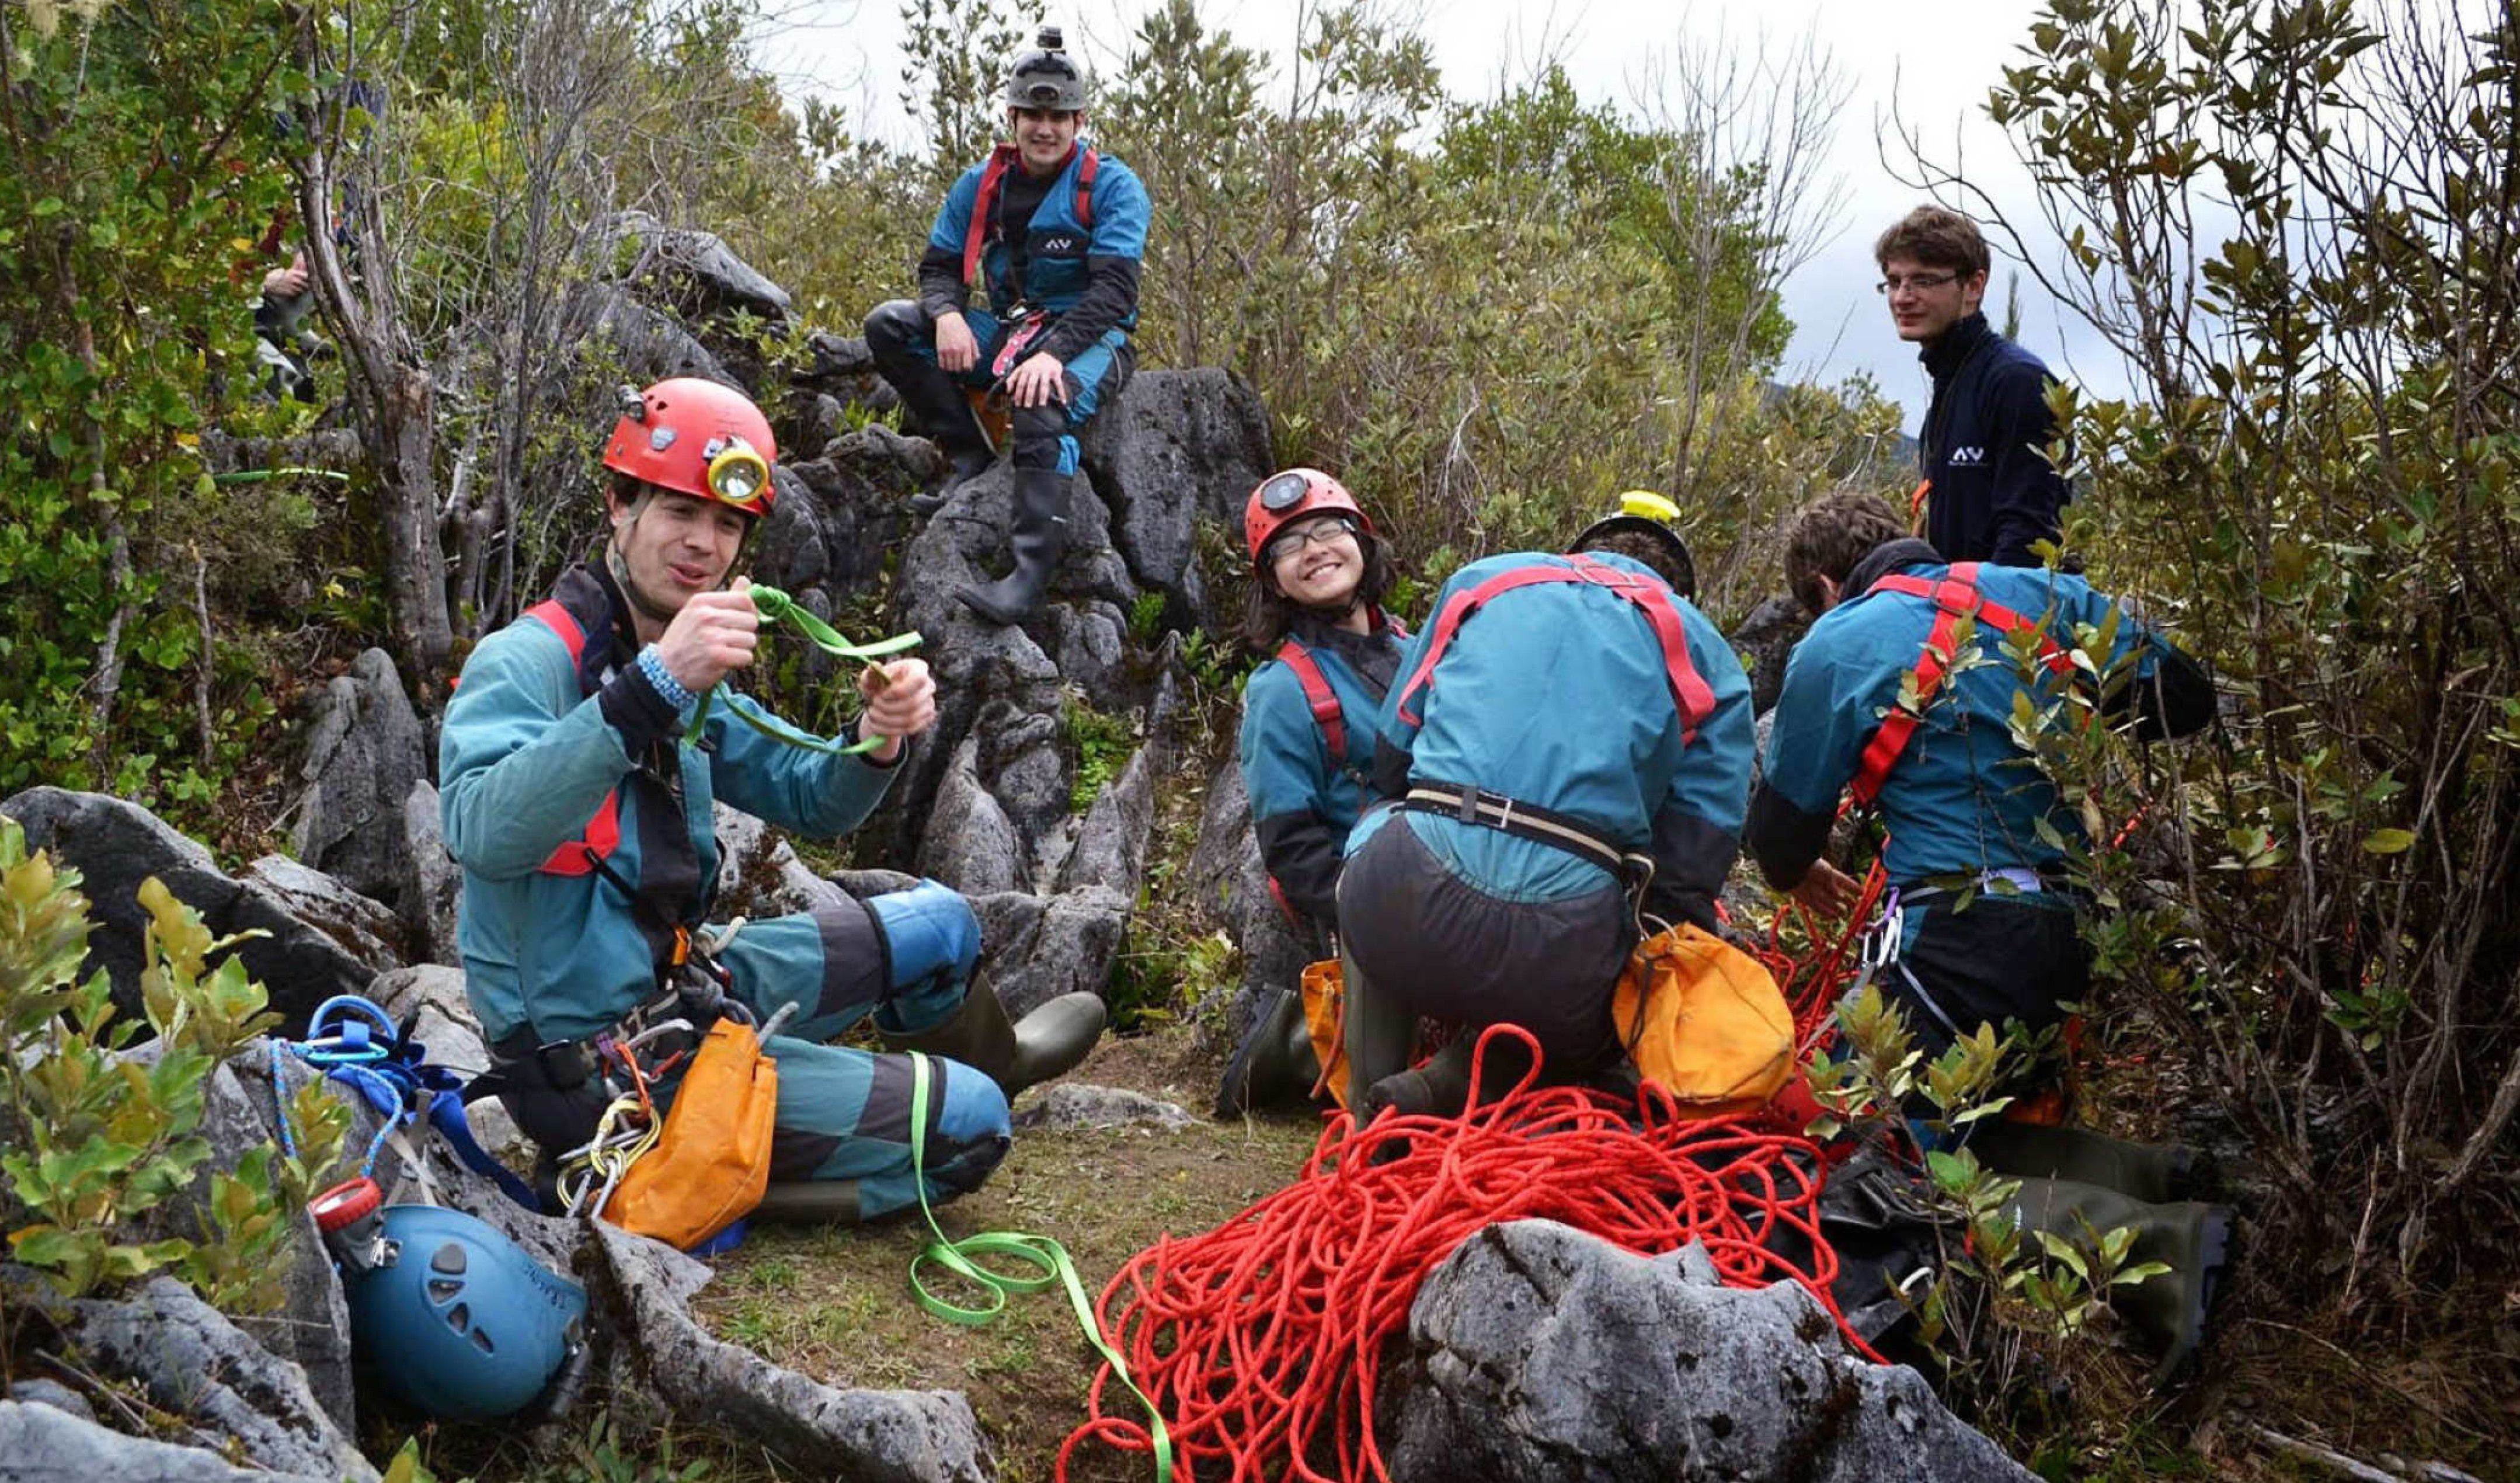 A group of students preparing to go caving